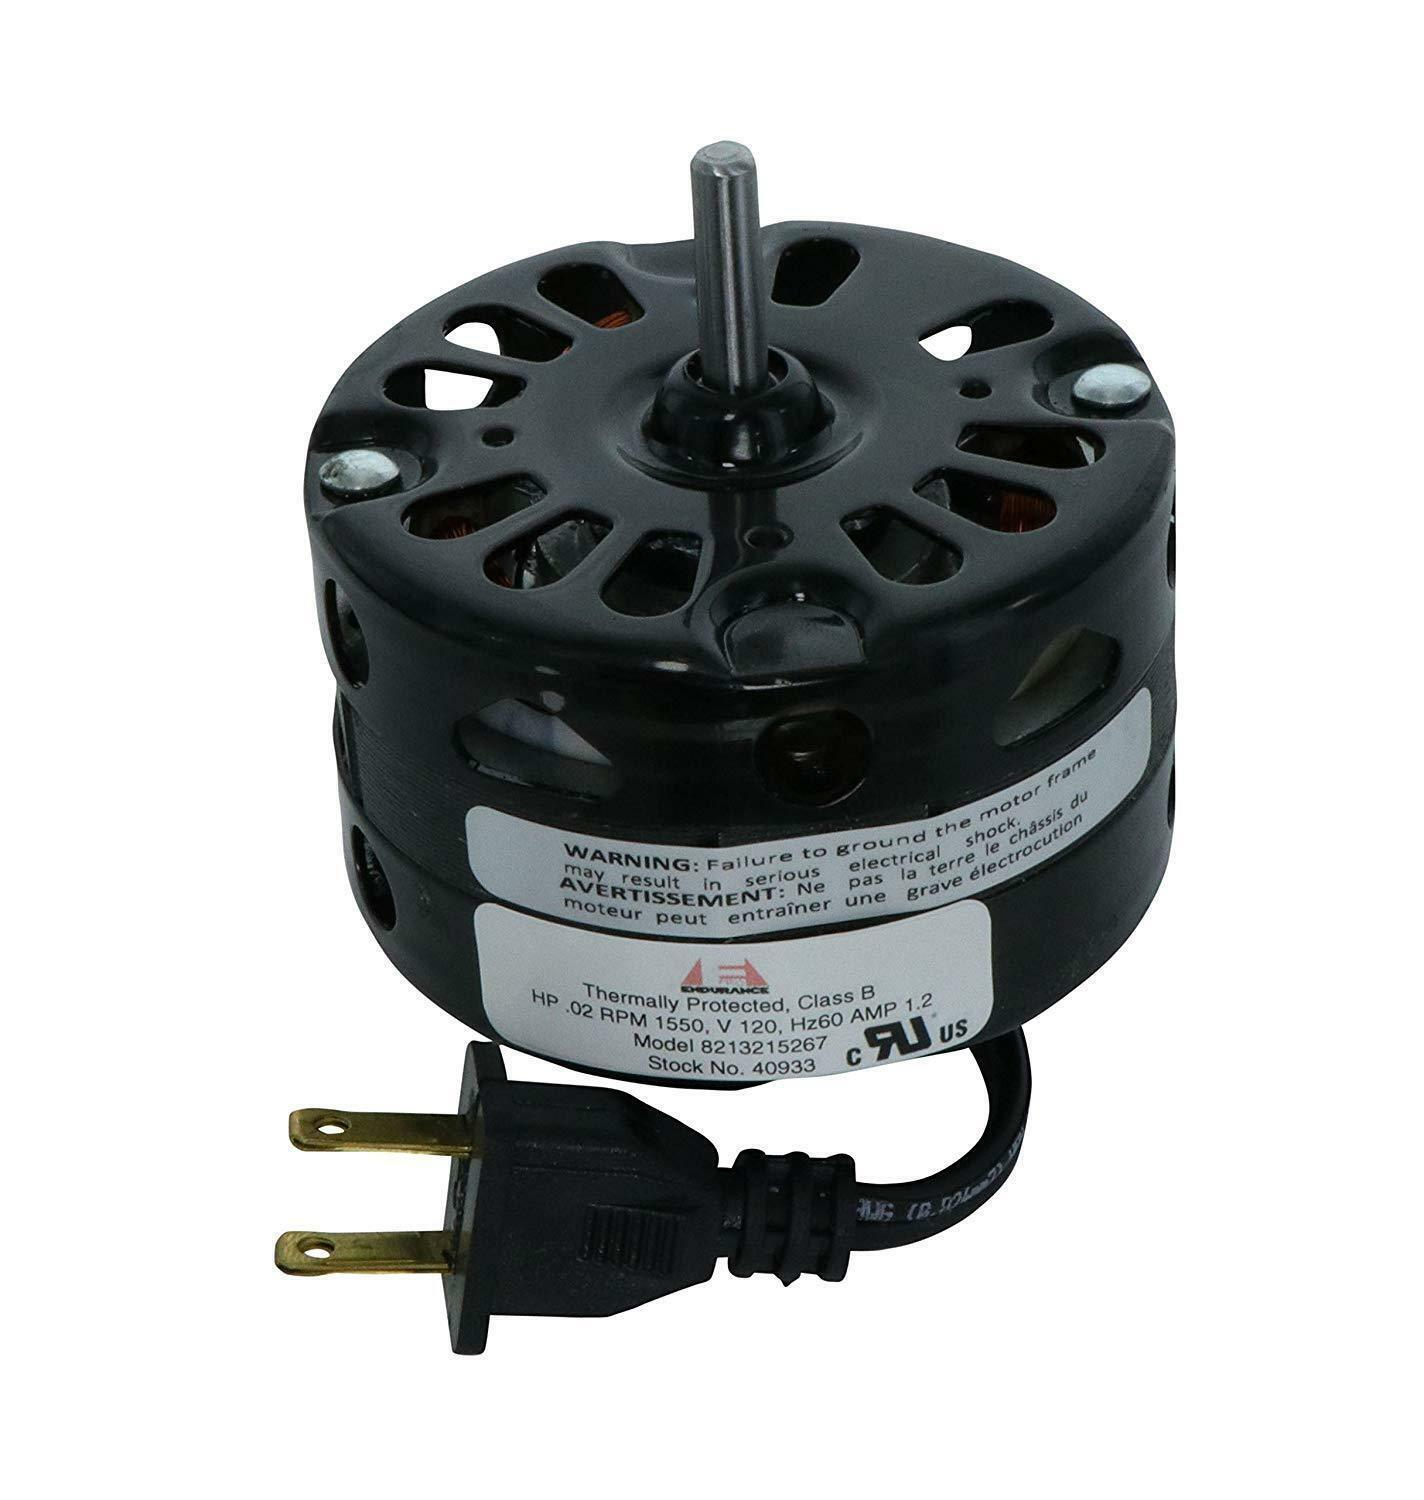 33 Ventilation Fan Motor 120v For Bathroom Kitchen Exhaust throughout dimensions 1424 X 1500